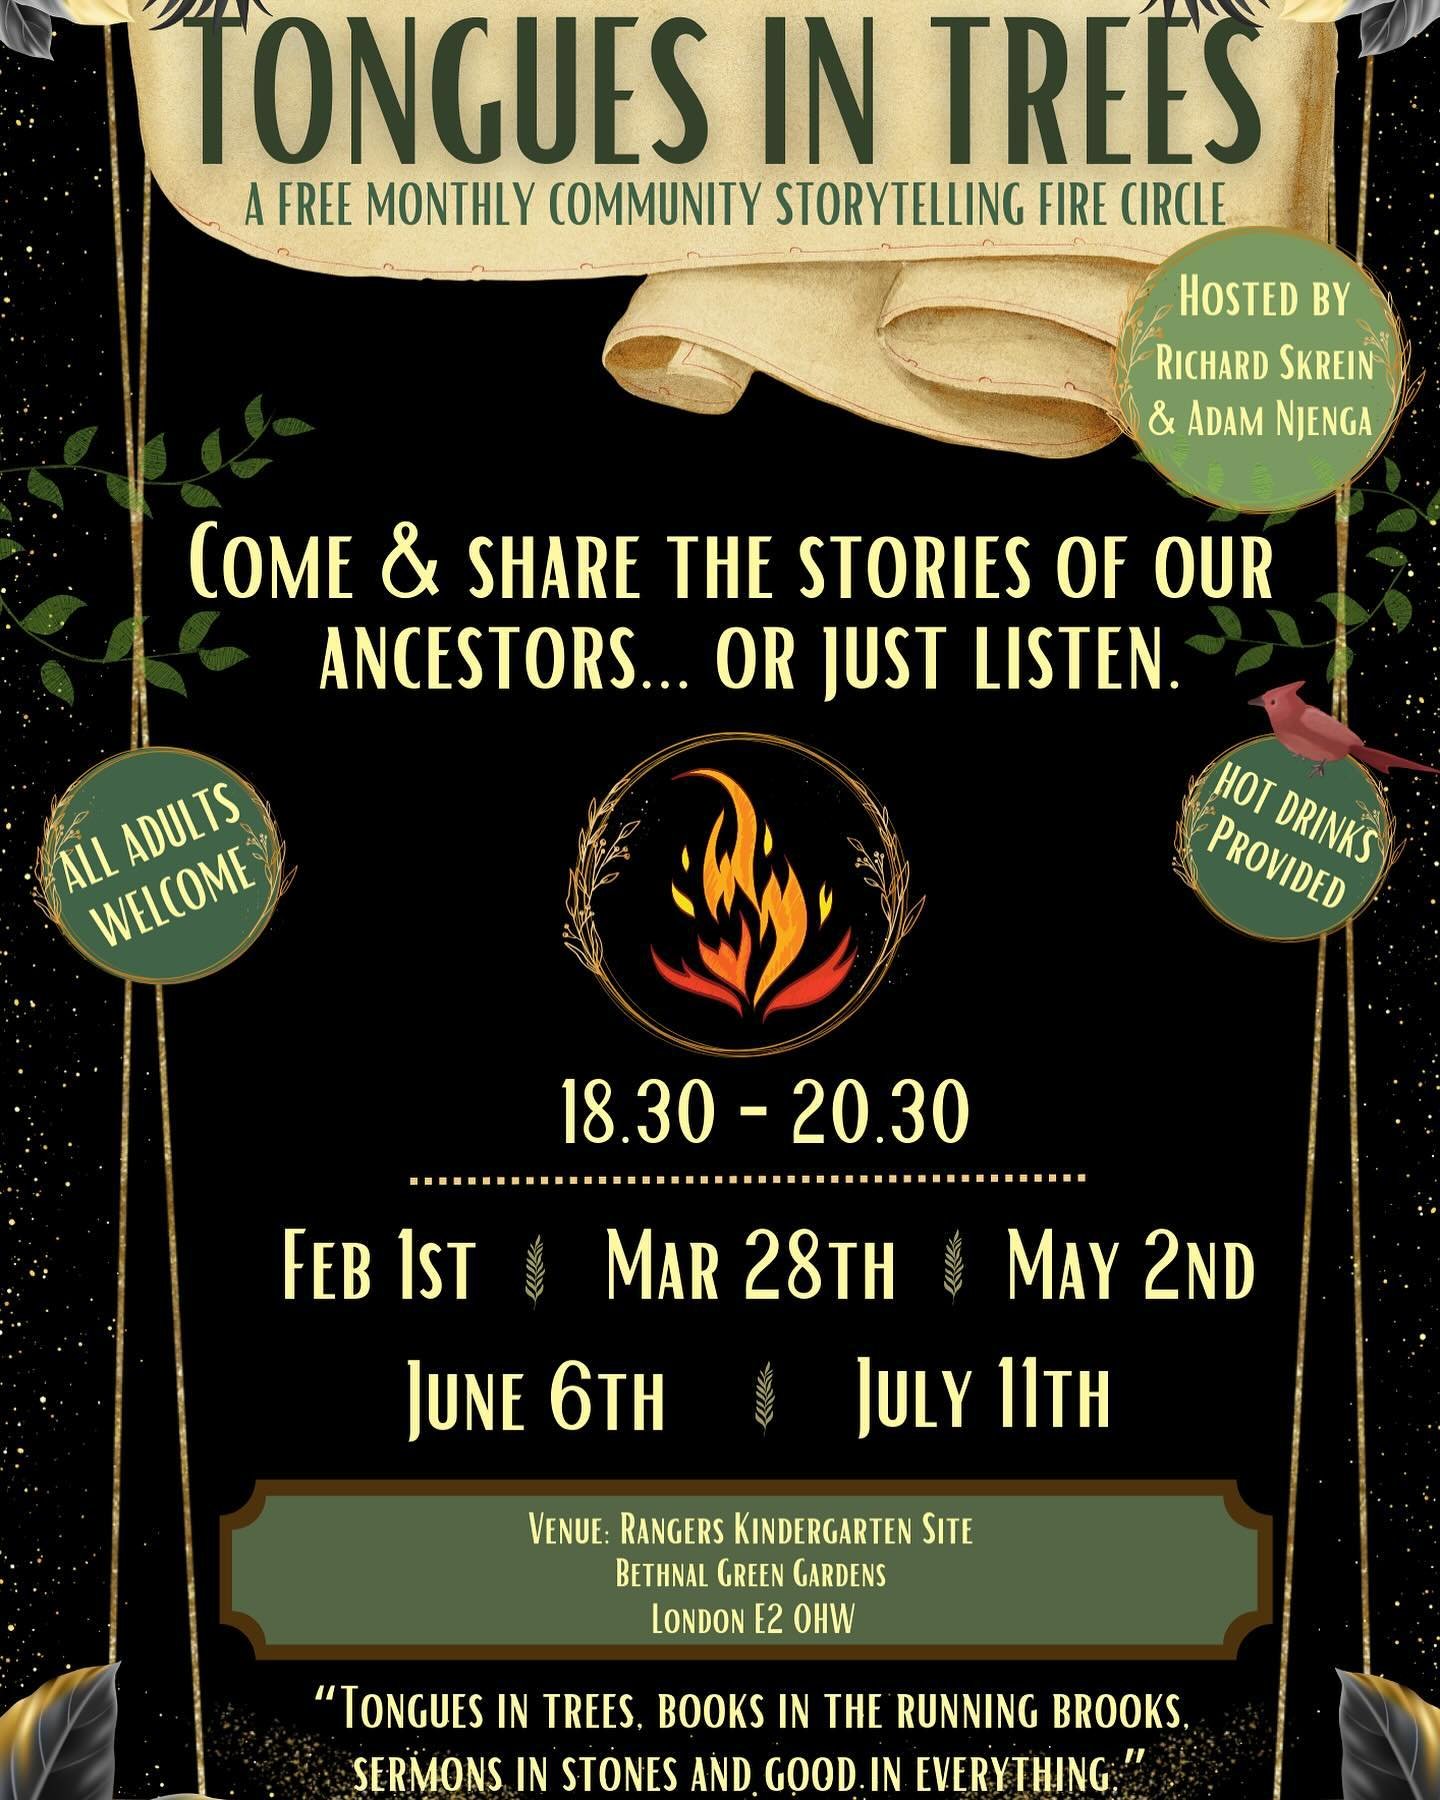 TONGUES IN TREES: a free monthly community storytelling fire circle hosted by me and Adam Njenga 🔥

Come to share the stories of our ancestors, or just listen - all adults are welcome ✨

At the Rangers Kindergarten site, Bethnal Green Gardens, Londo